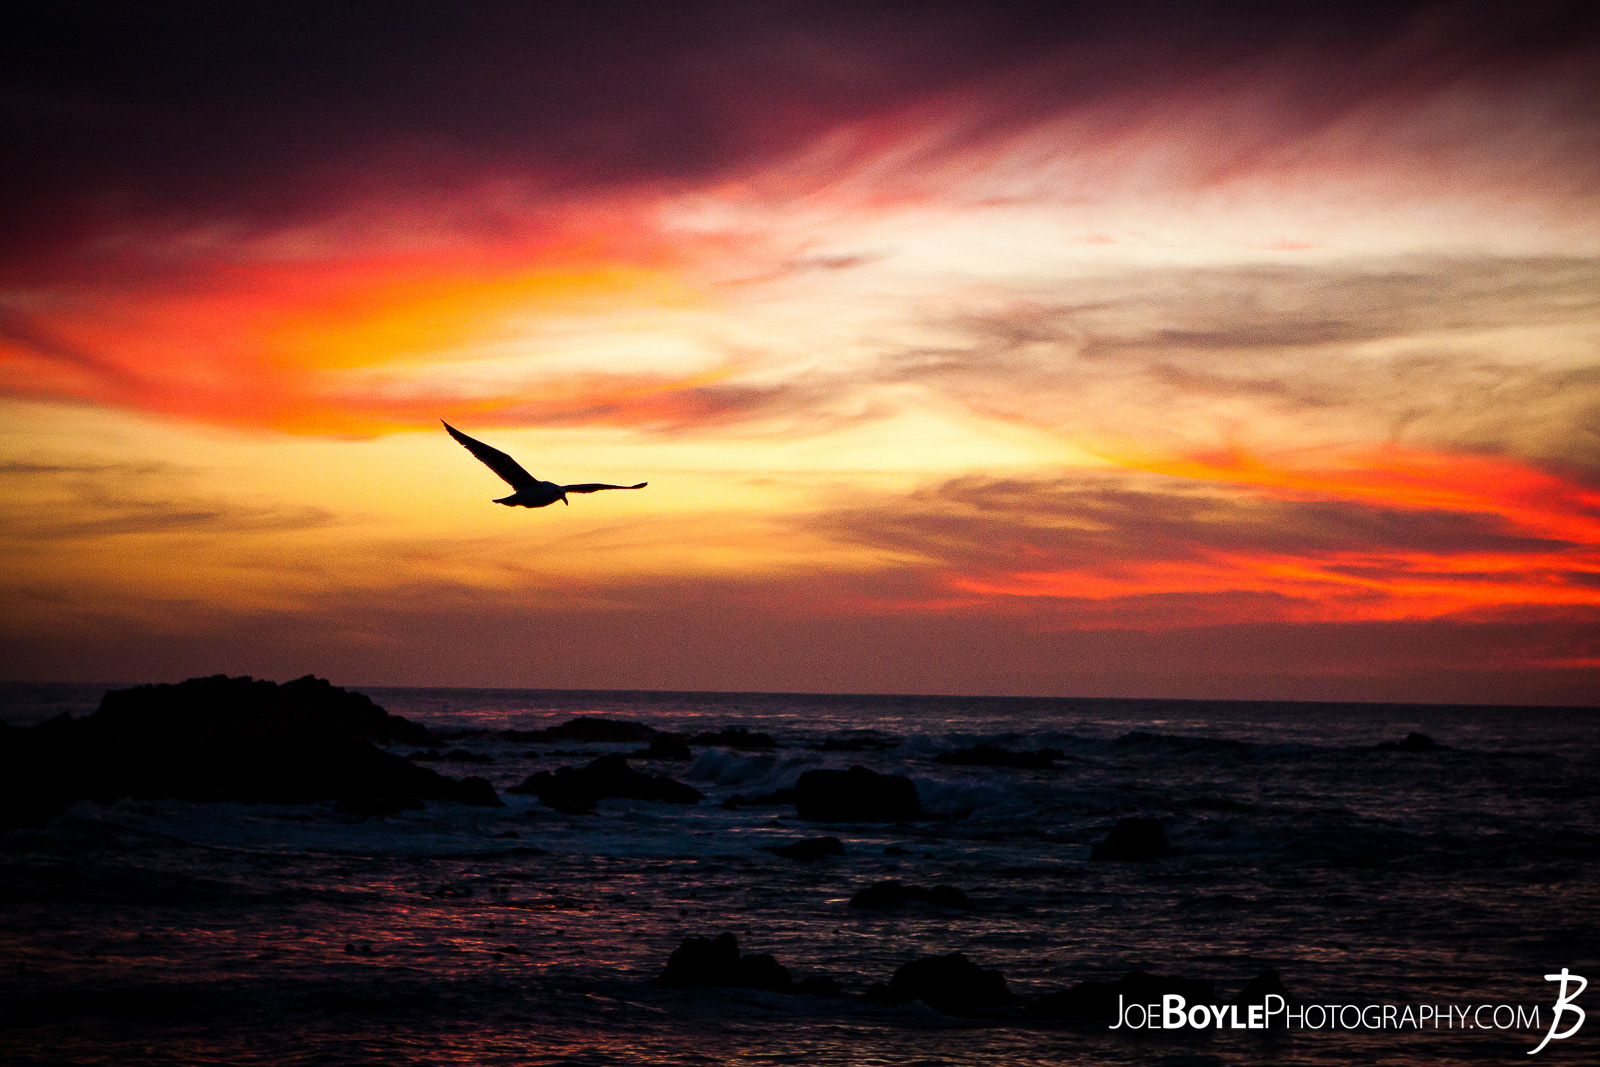  When I was traveling to Monterey, California I spent a lot of time walking around the city, Pacific Grove and the sand dunes in the area. Here is a shot of a gliding heron silhouetted in the sunset sky! 